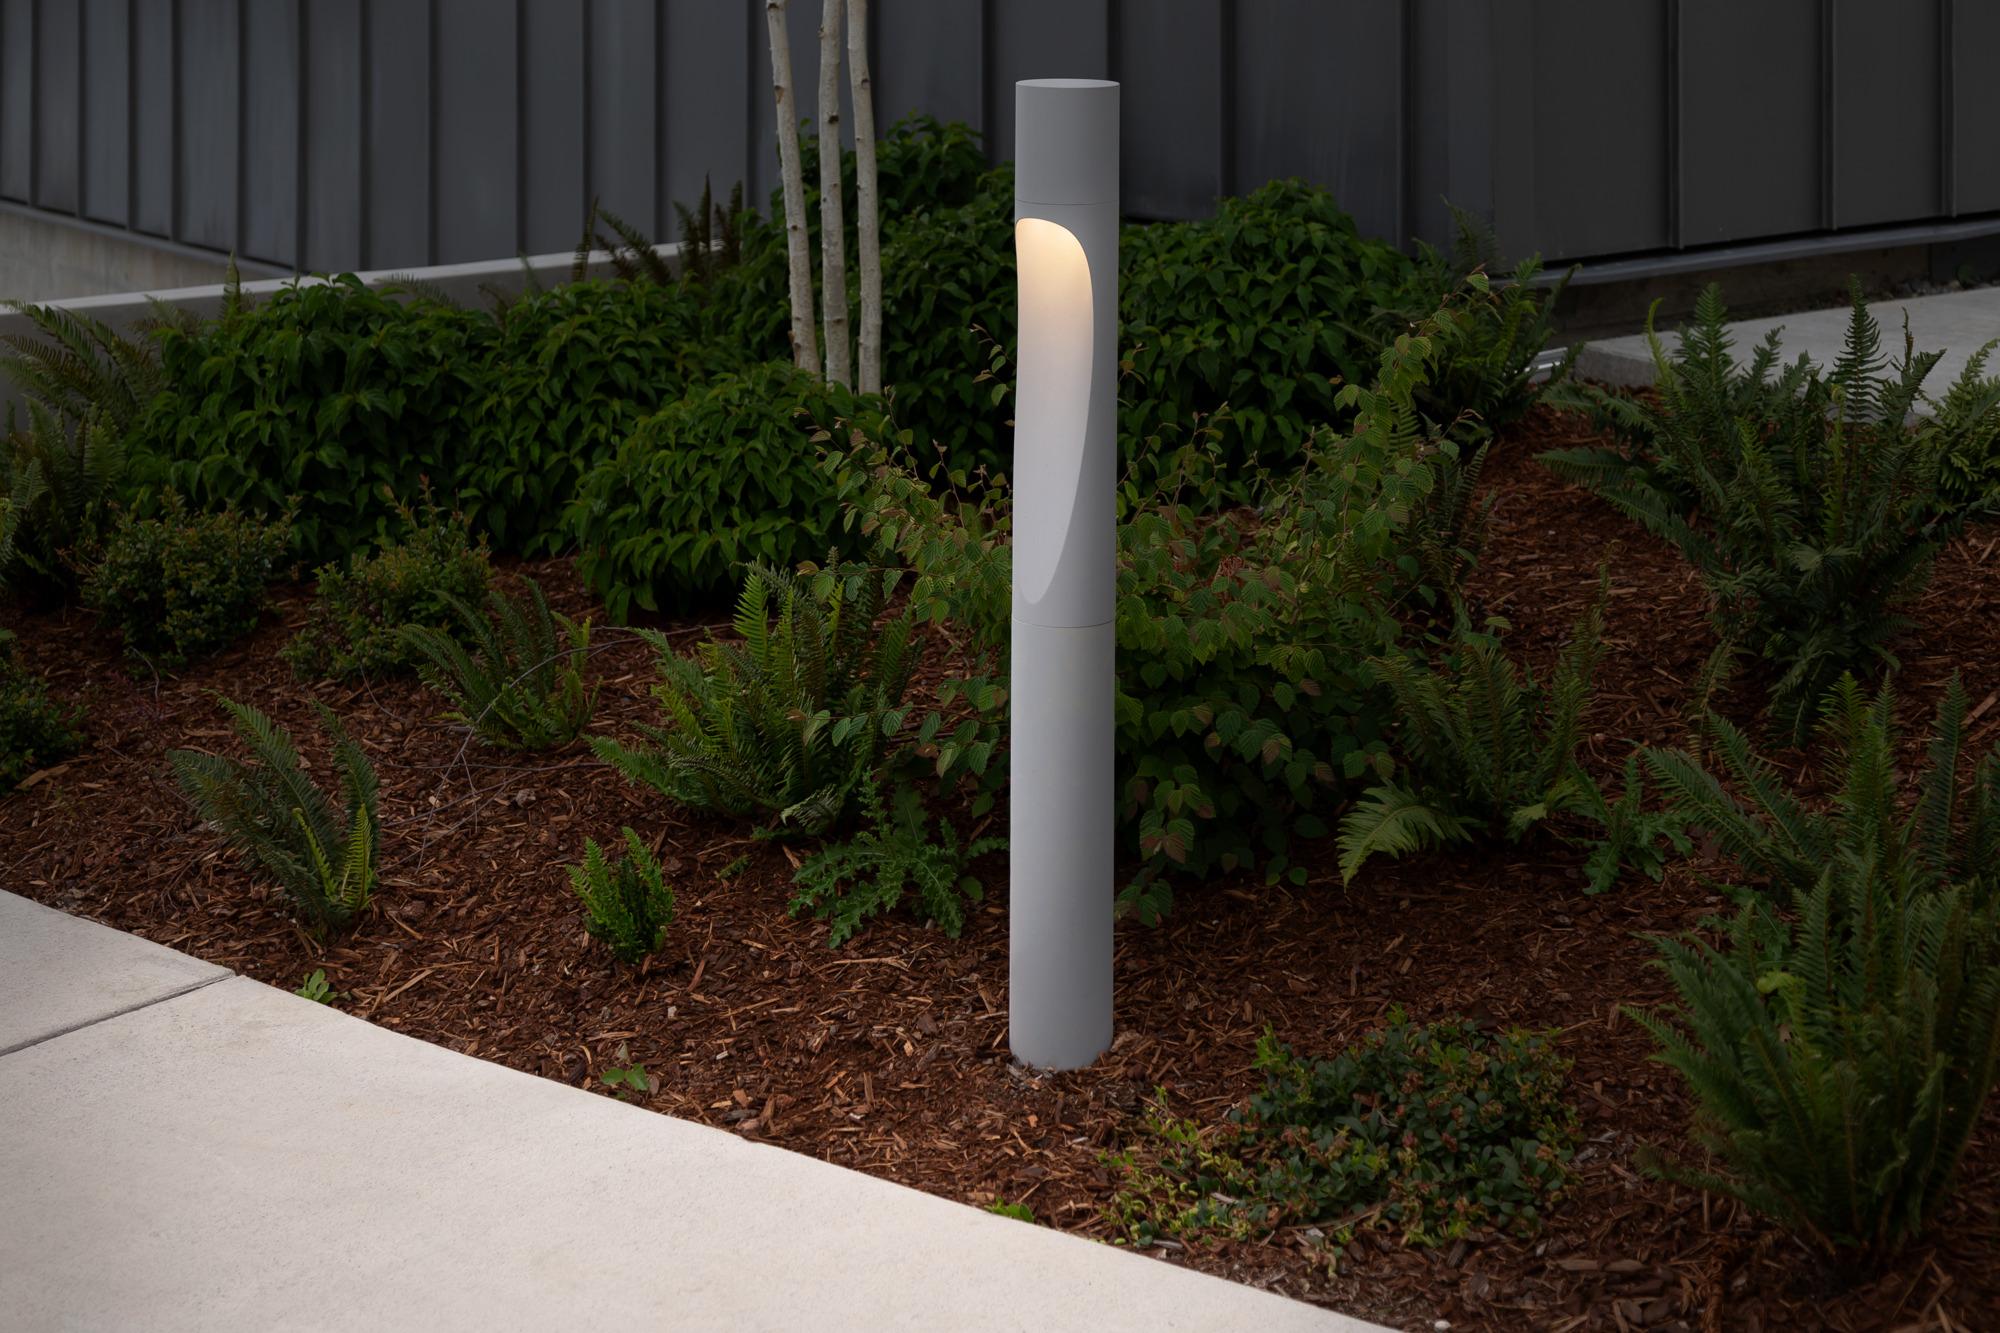 'Flindt Garden Short' Outdoor Bollard Light in Aluminum for Louis Poulsen

A highly refined fixture that brings bold, sculptural illumination to outdoor spaces. Introduced in 2021, the 'Garden' bollard is the latest addition to the Flindt family,